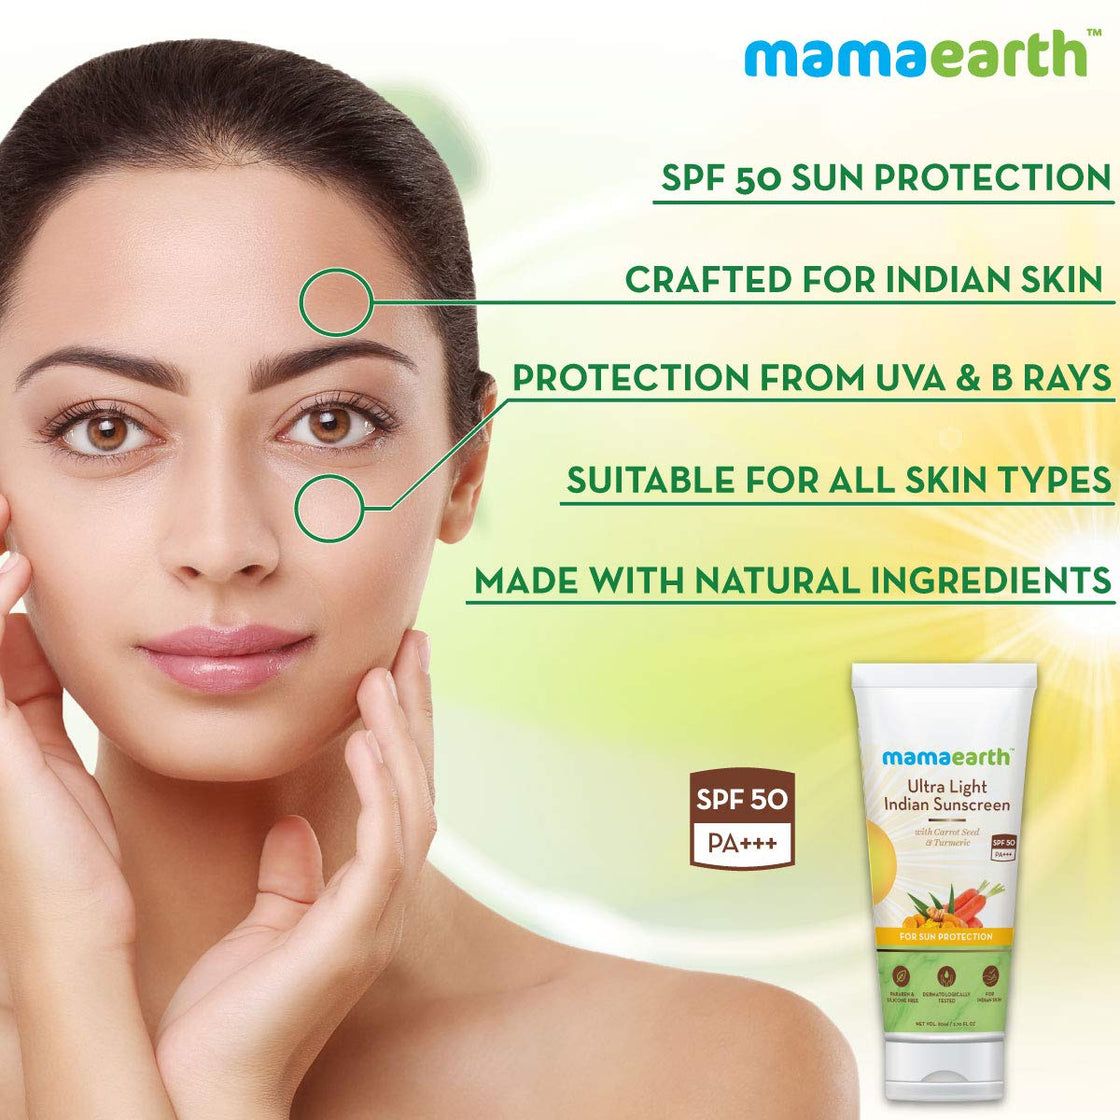 Mamaearth Ultra Light Indian Sunscreen Spf50 Pa+++ With Turmeric & Carrot Seed-6